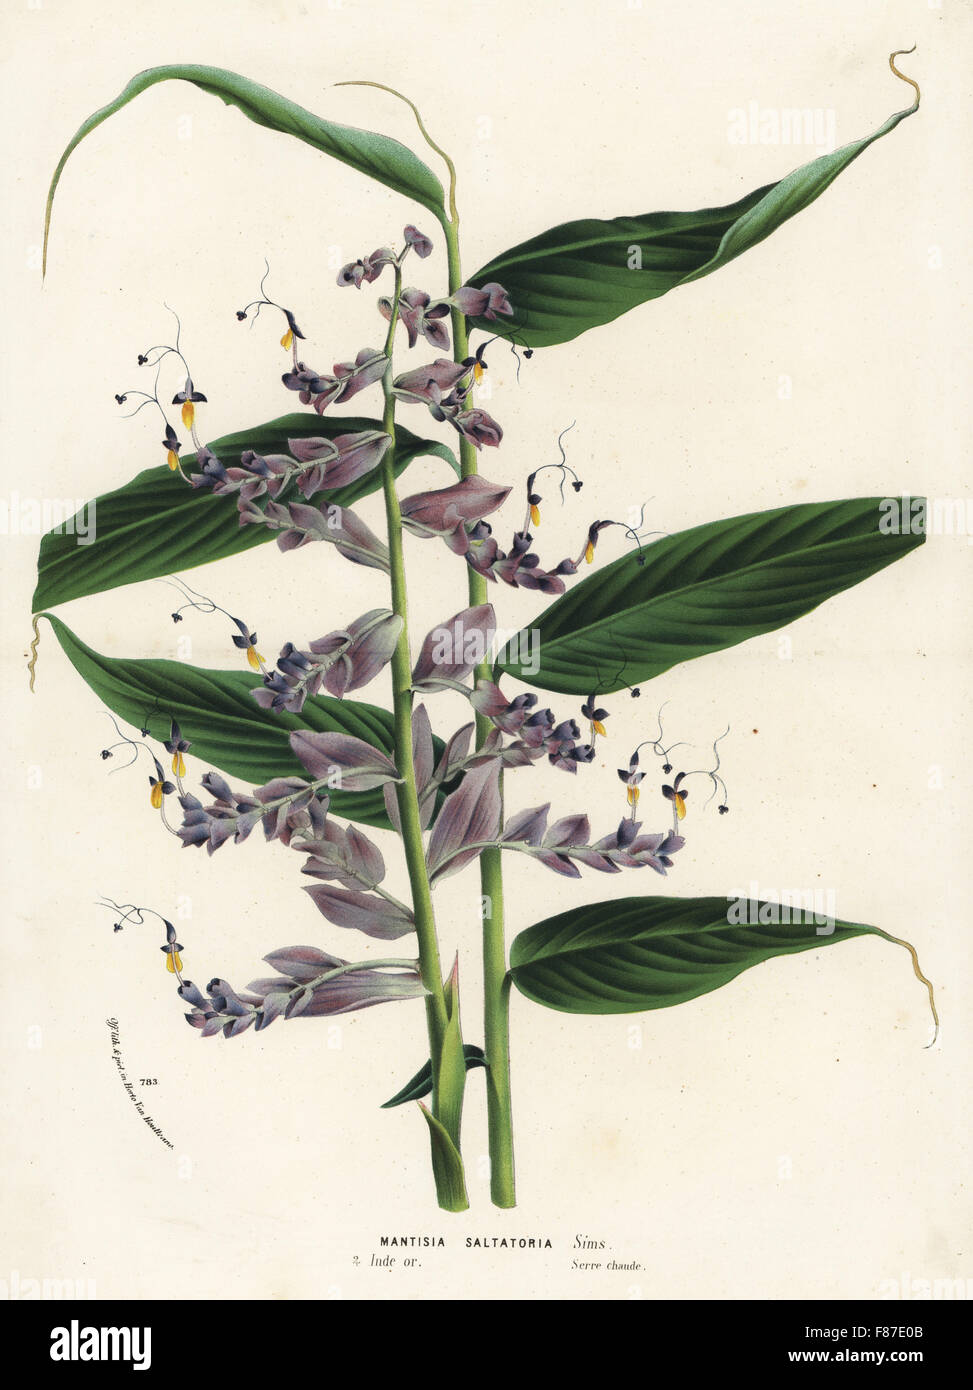 Globba radicalis (Mantisia saltatoria), native to the Himalayas, India. Handcoloured lithograph from Louis van Houtte and Charles Lemaire's Flowers of the Gardens and Hothouses of Europe, Flore des Serres et des Jardins de l'Europe, Ghent, Belgium, 1874. Stock Photo